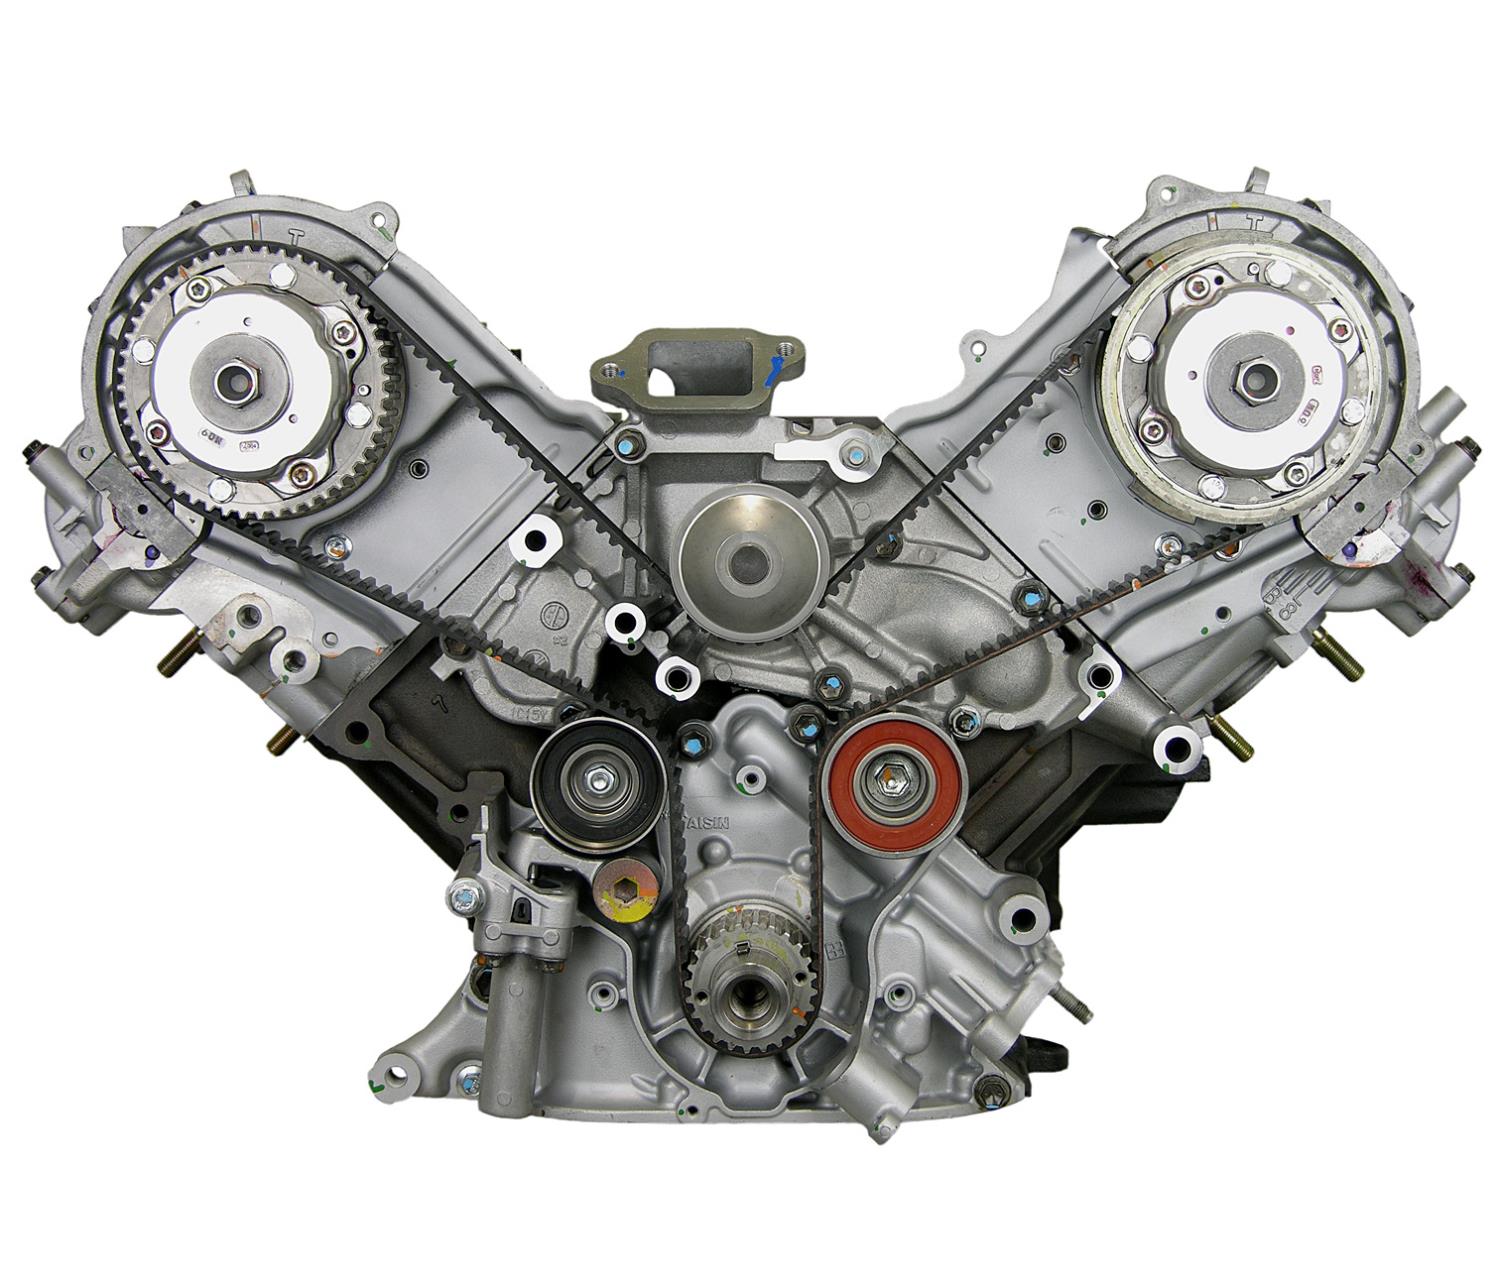 Remanufactured Crate Engine for 2004-2009 Toyota & Lexus